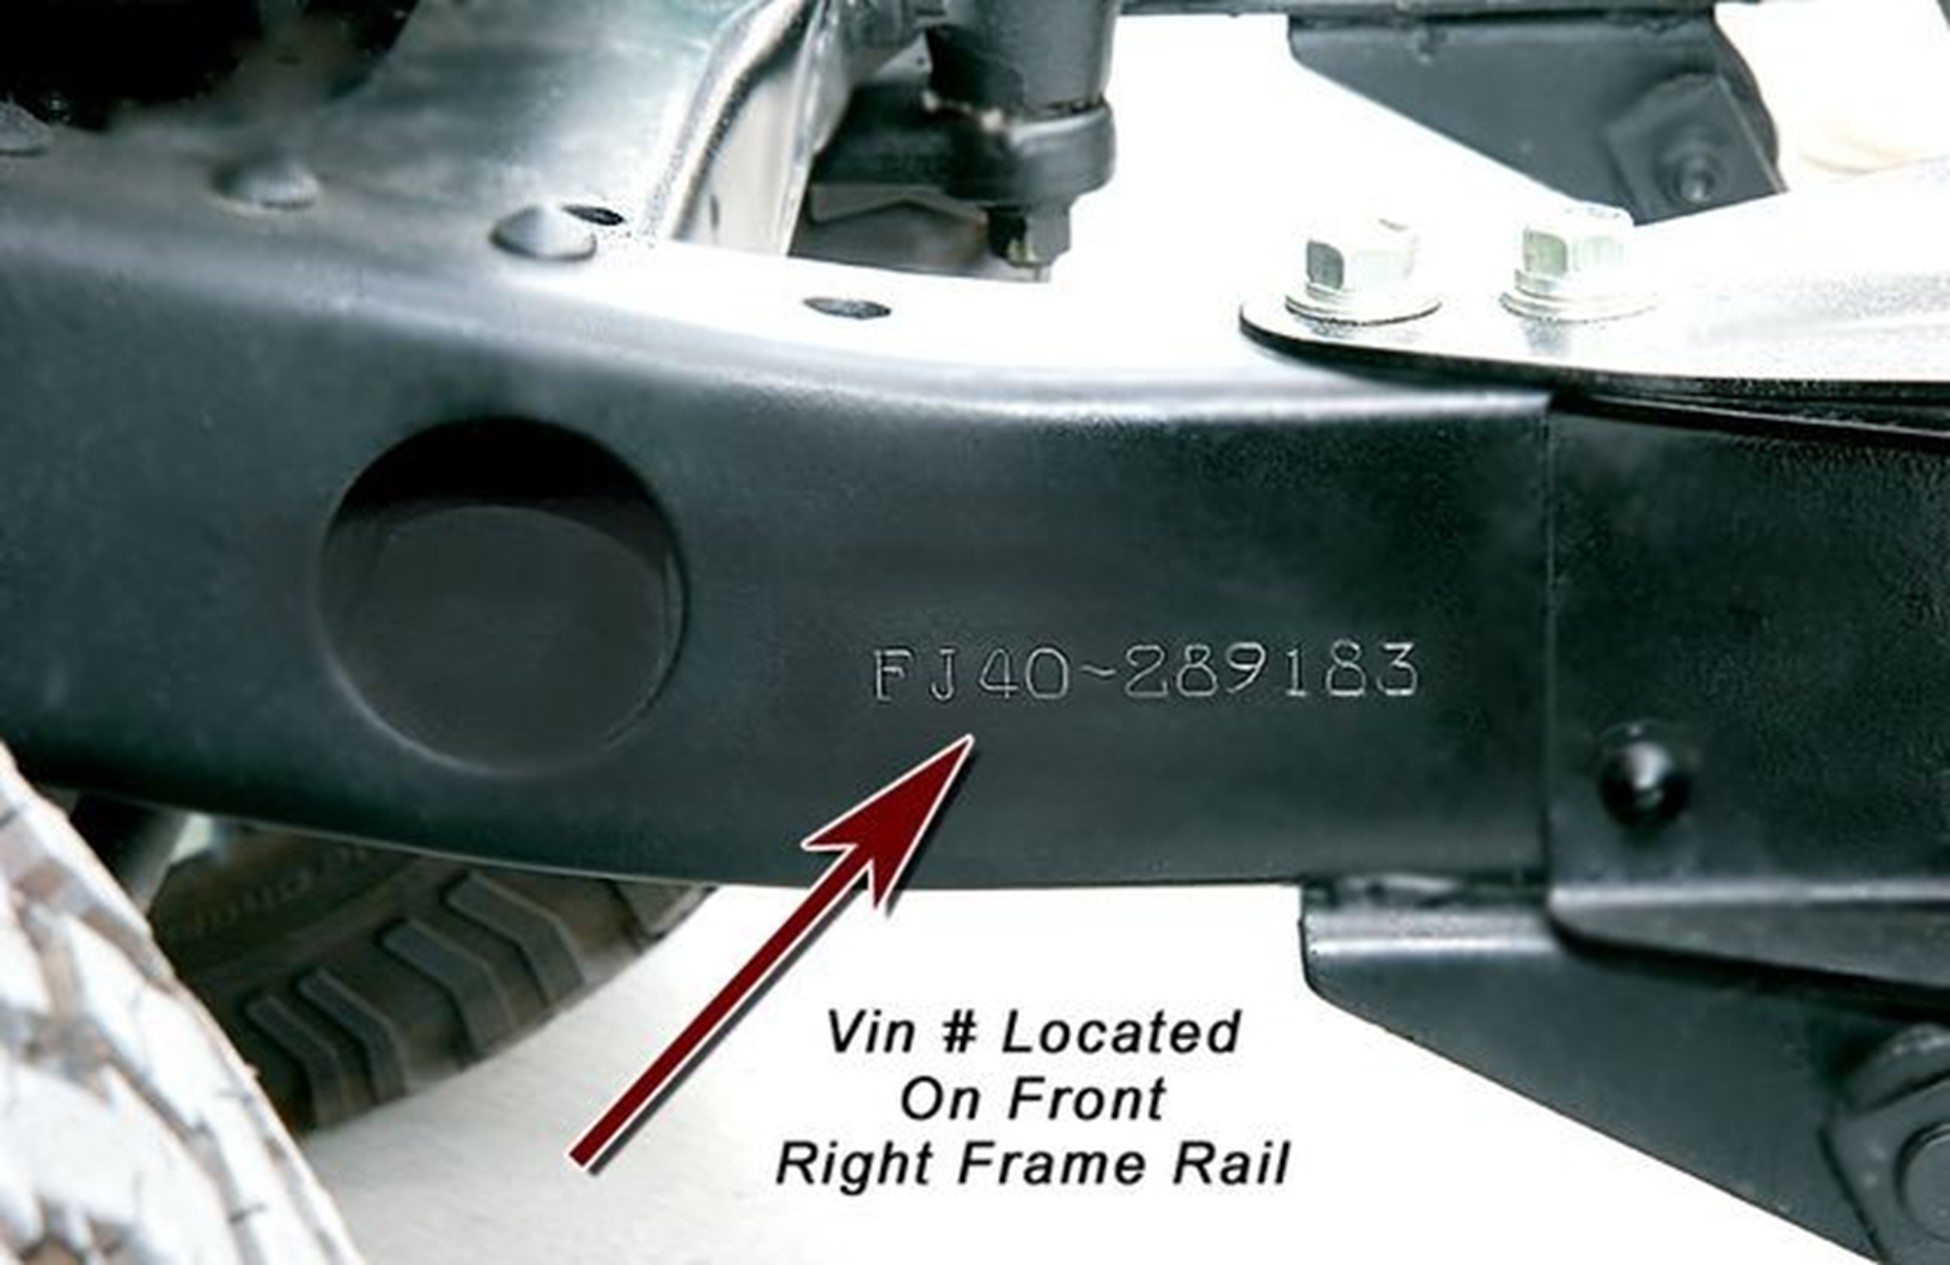 What Is VIN (Vehicle Identification Number)? Do We Need to Share the VIN When Selling a Car to the Junkyard?